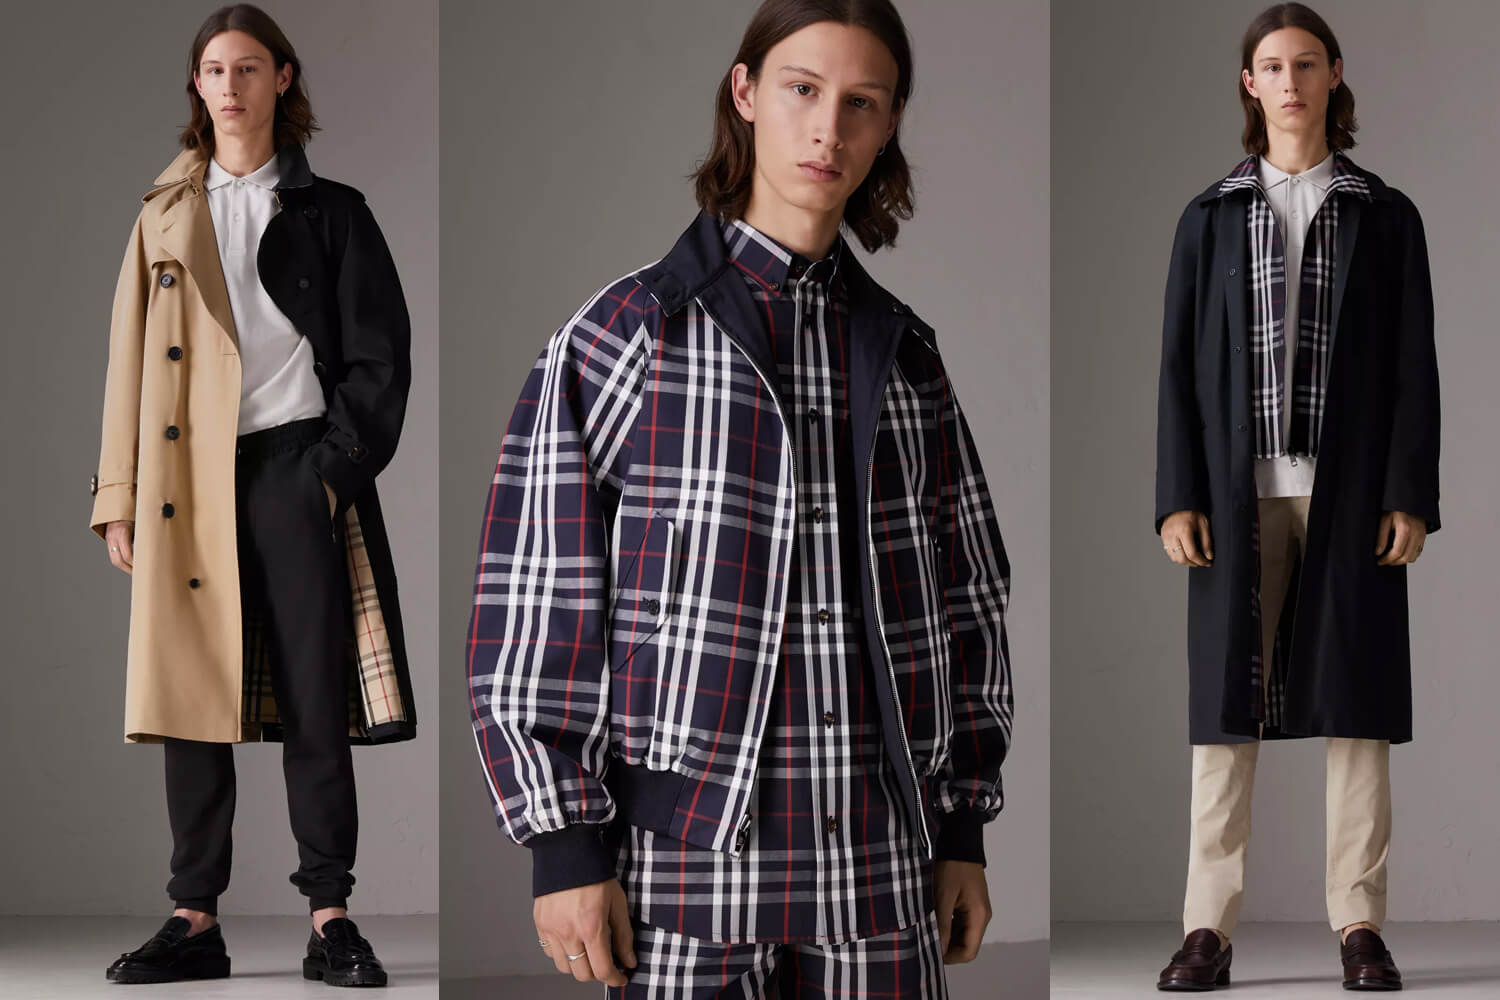 See all the looks from the new Gosha x Burberry capsule collection ...